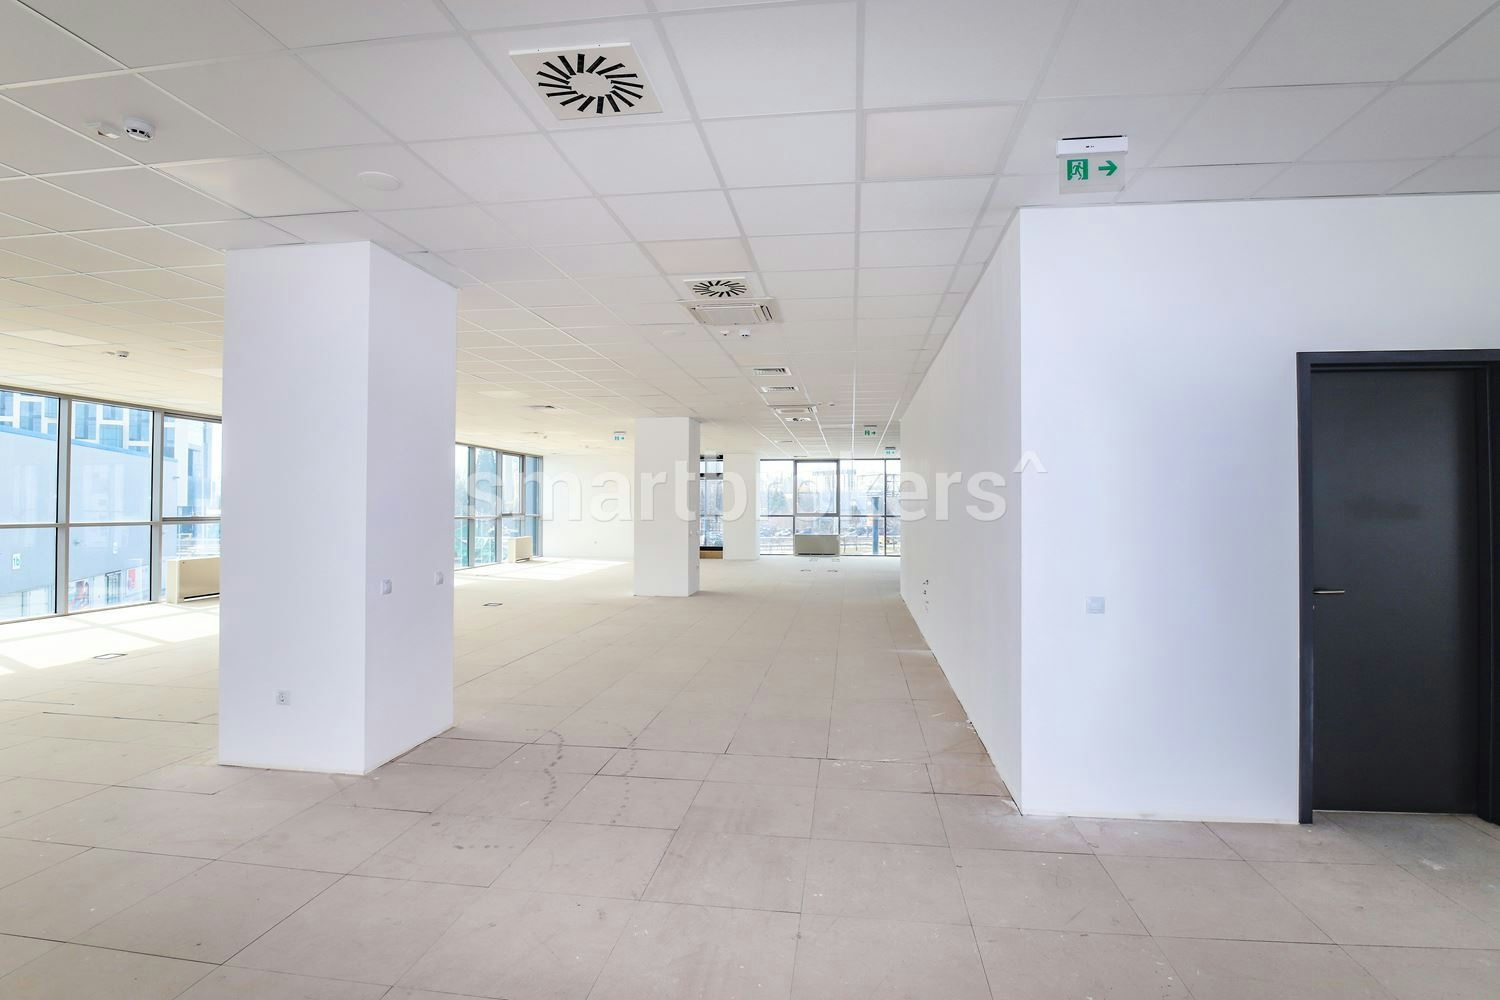 Office for rent located on 8th floor in a sustainable and comfortable building Sofia Office Center located on Tsarigradsko Shosse Blvd.